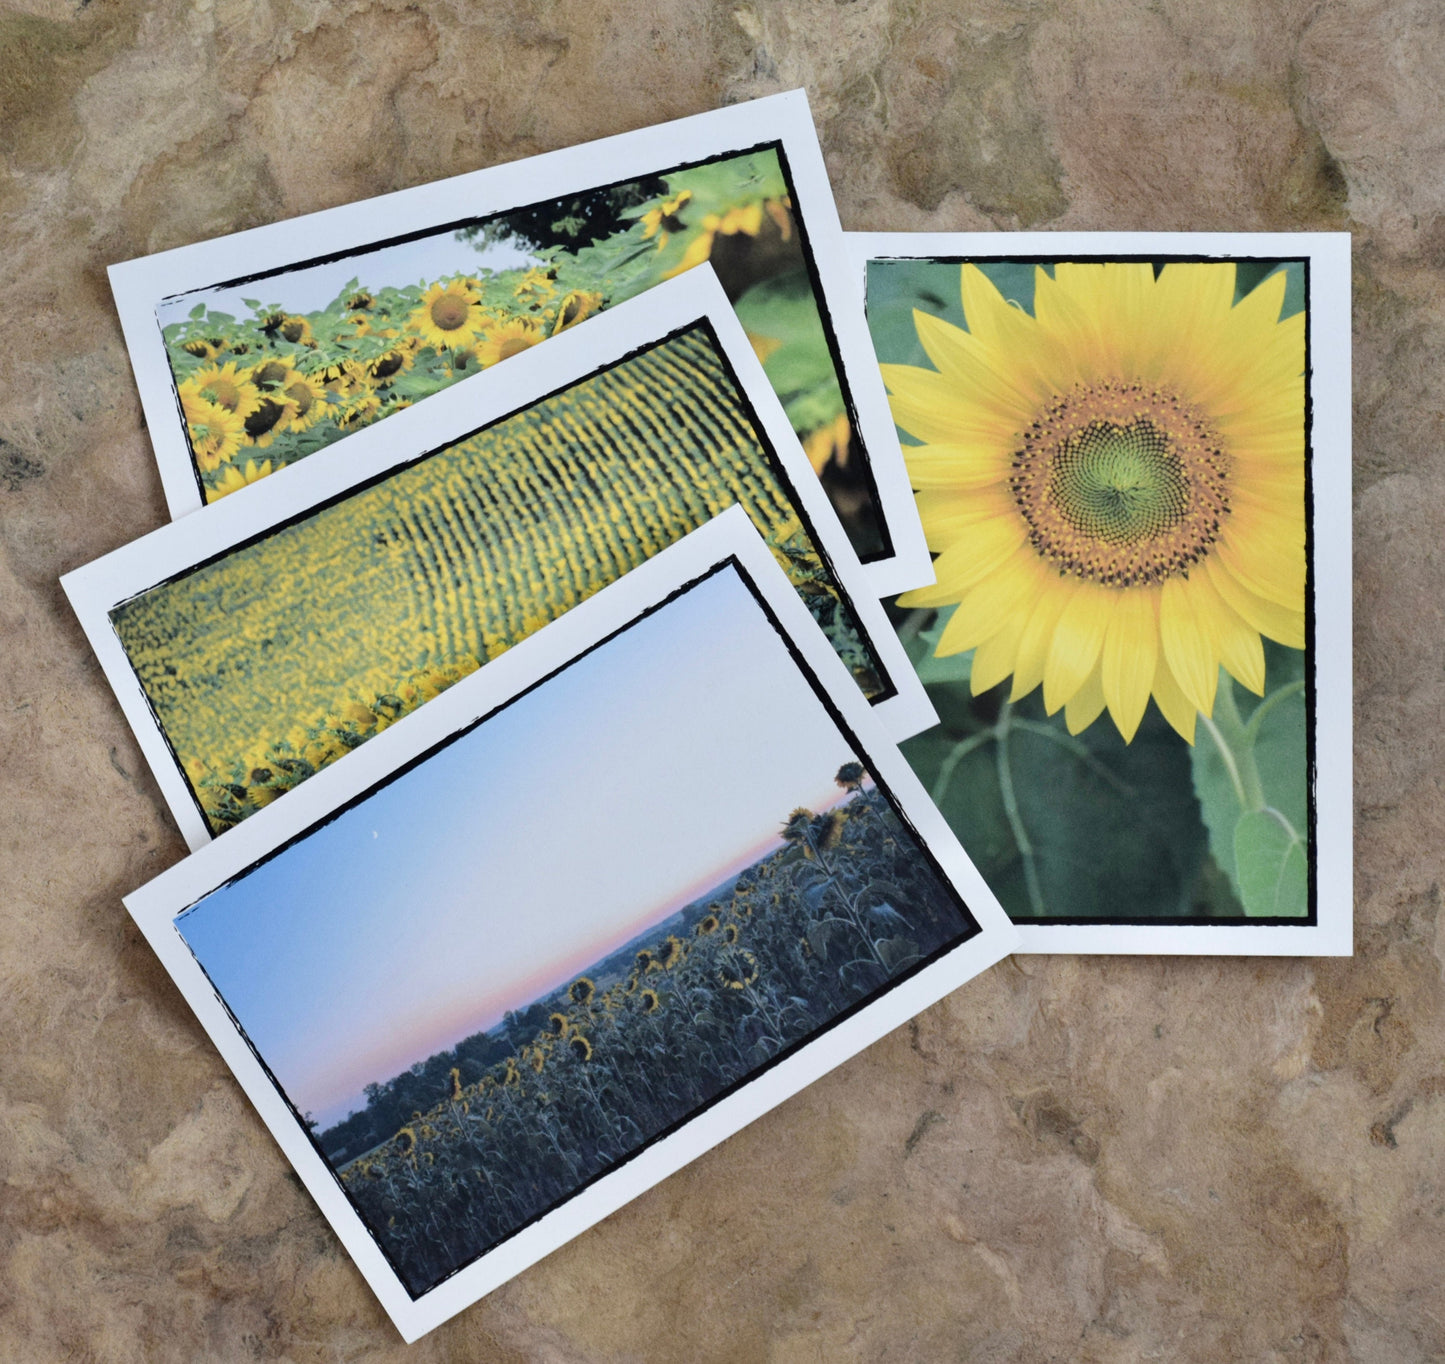 Sunflower Greeting Cards - Inspirational, Eco-Friendly Sunflower Cards